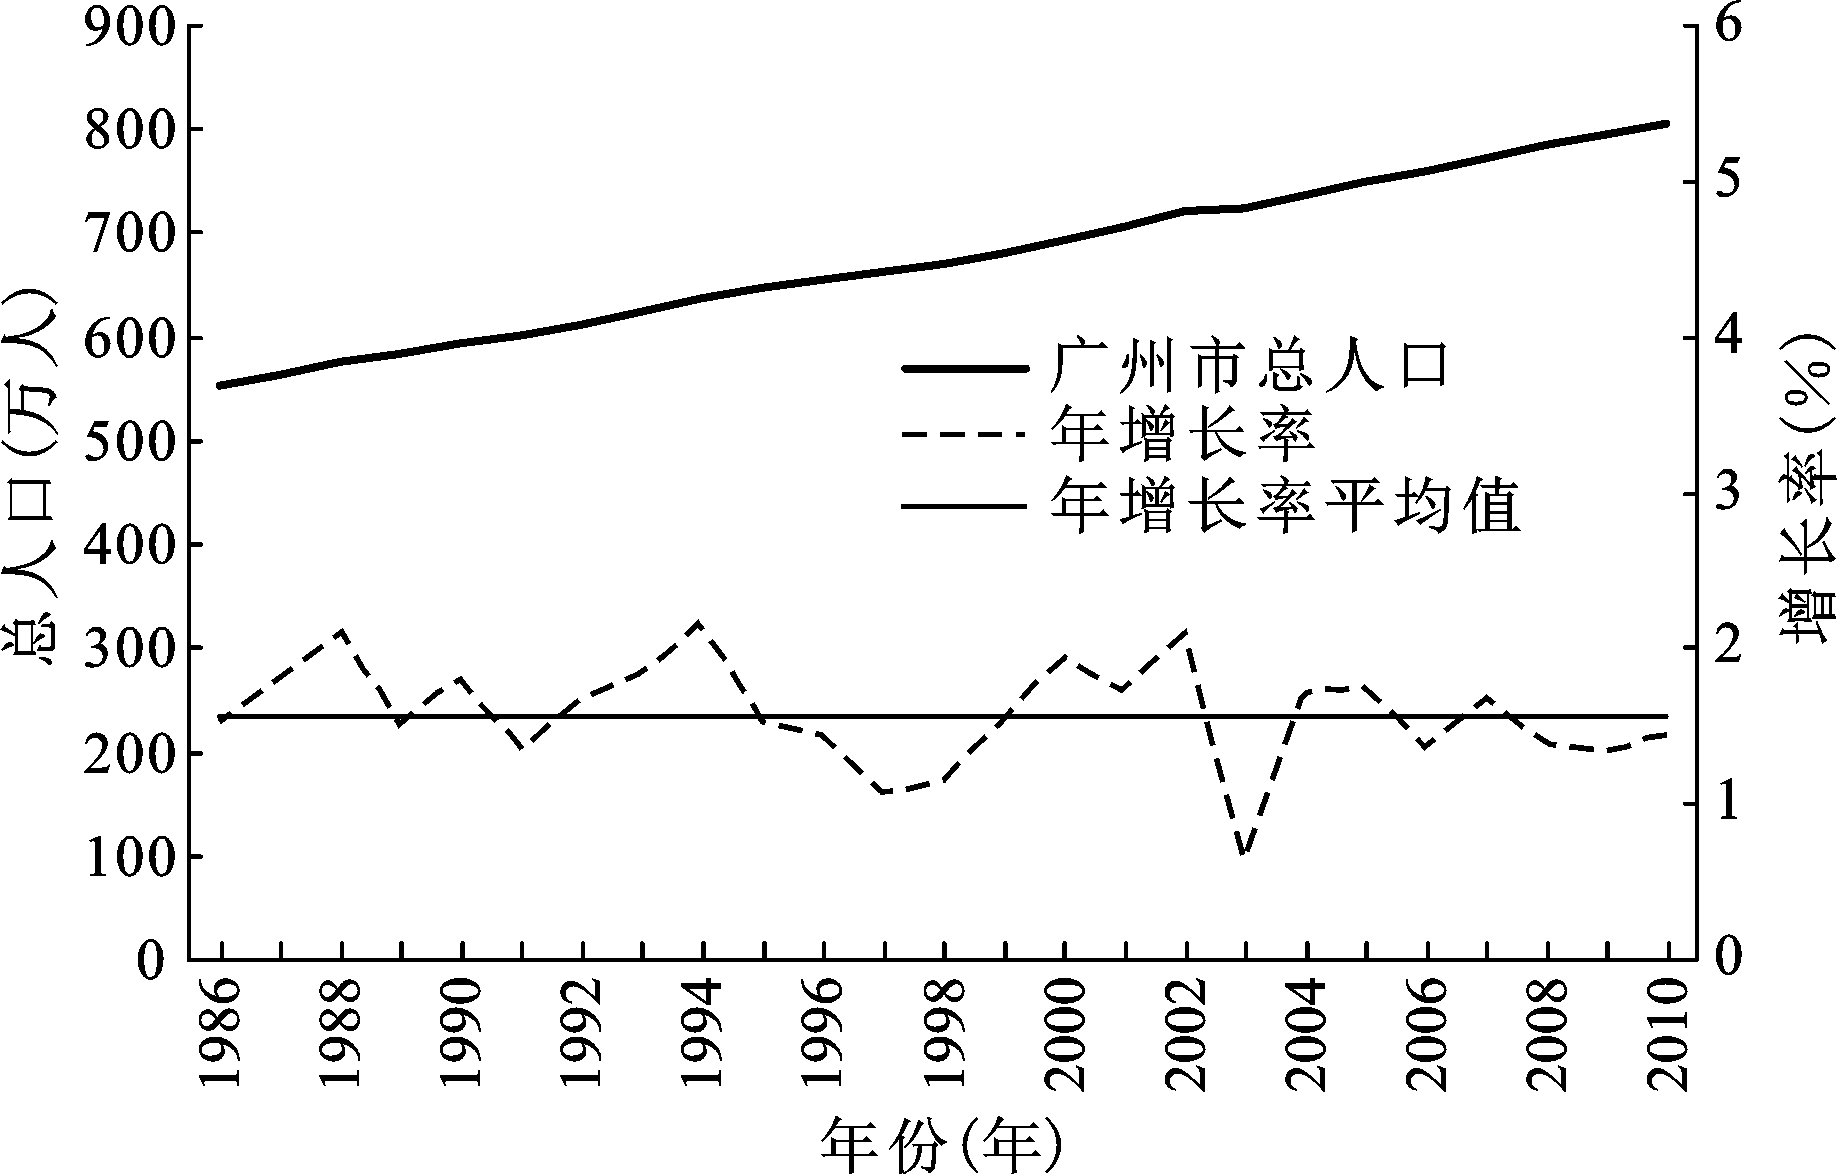 The Growth and Distribution of Population in Guangzhou City in 19822000